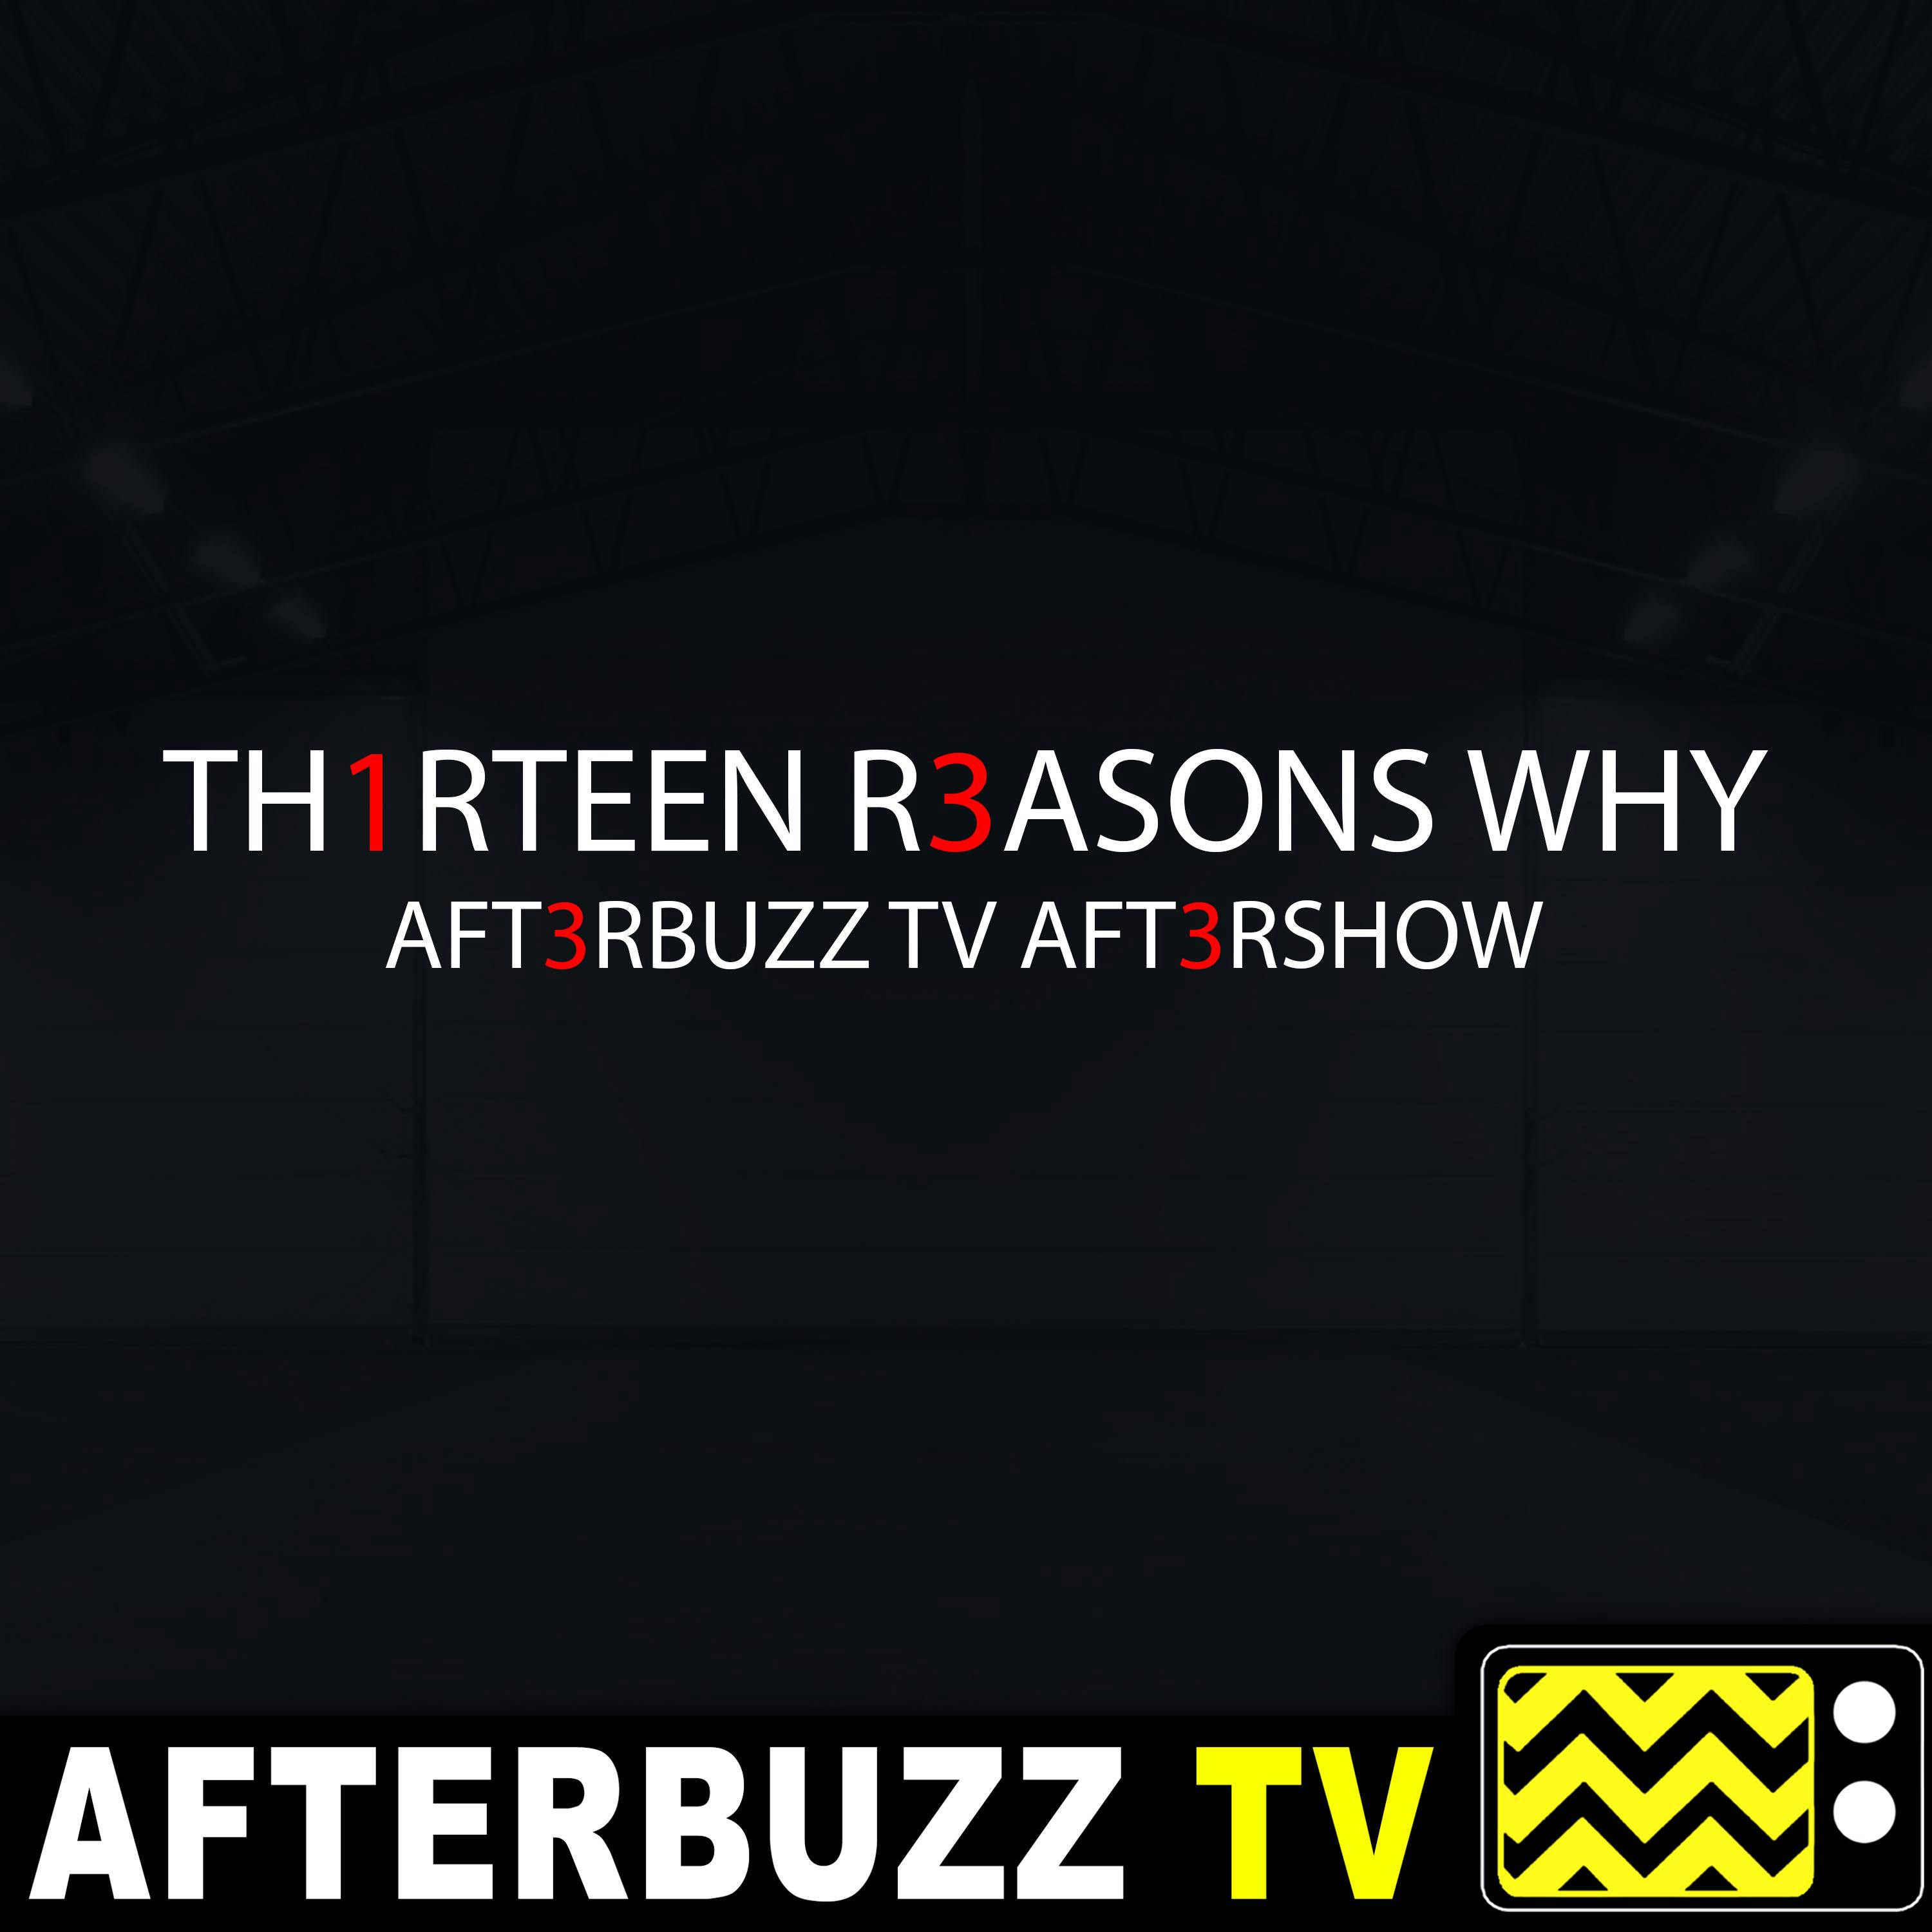 ”And Then the Hurricane Hit” Season 3 Episode 12 ’13 Reasons Why’ Review